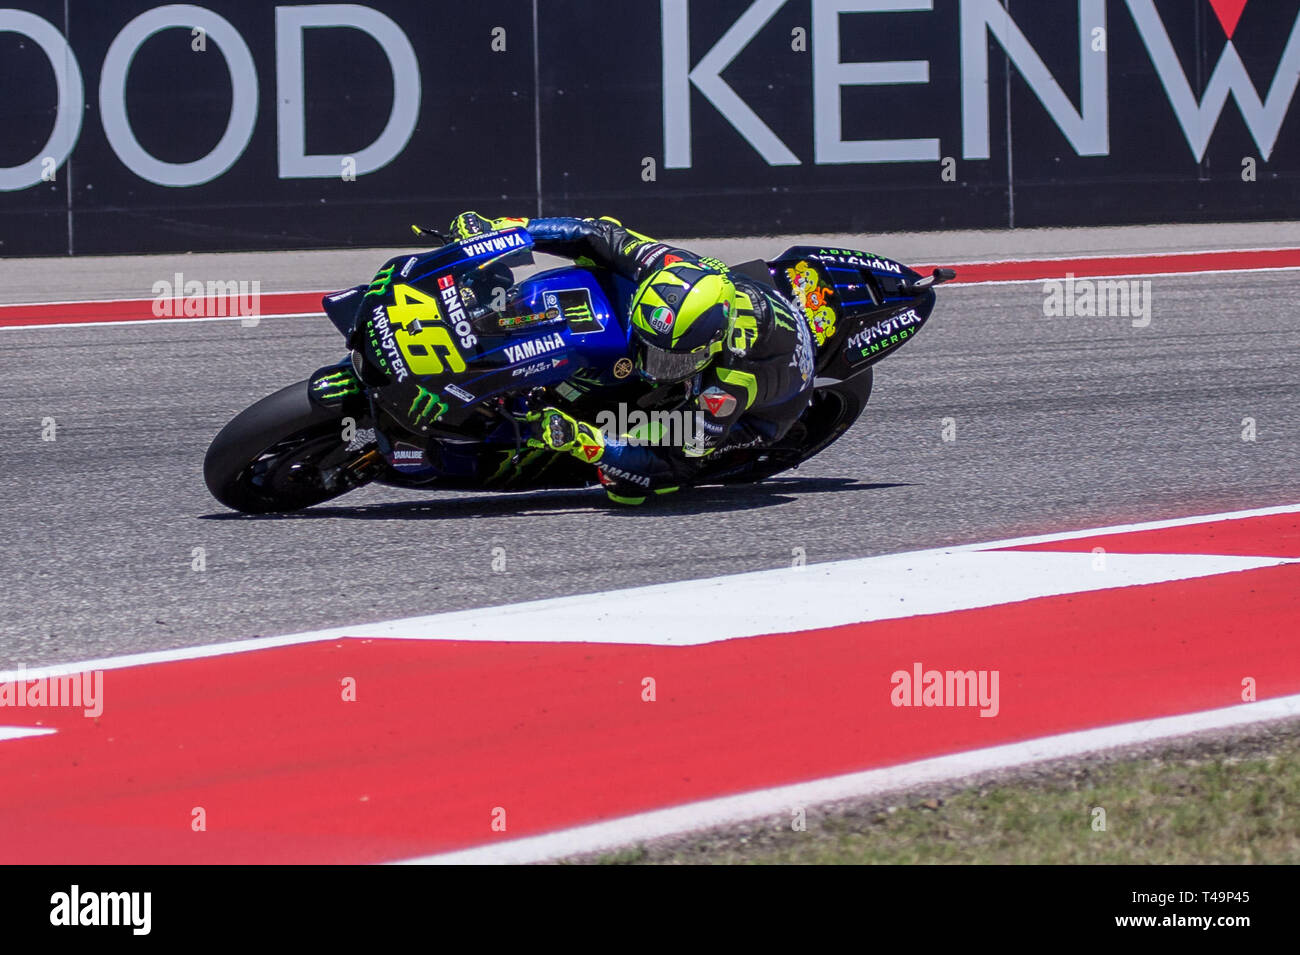 Valentino Rossi 46 High Resolution Stock Photography and Images - Alamy